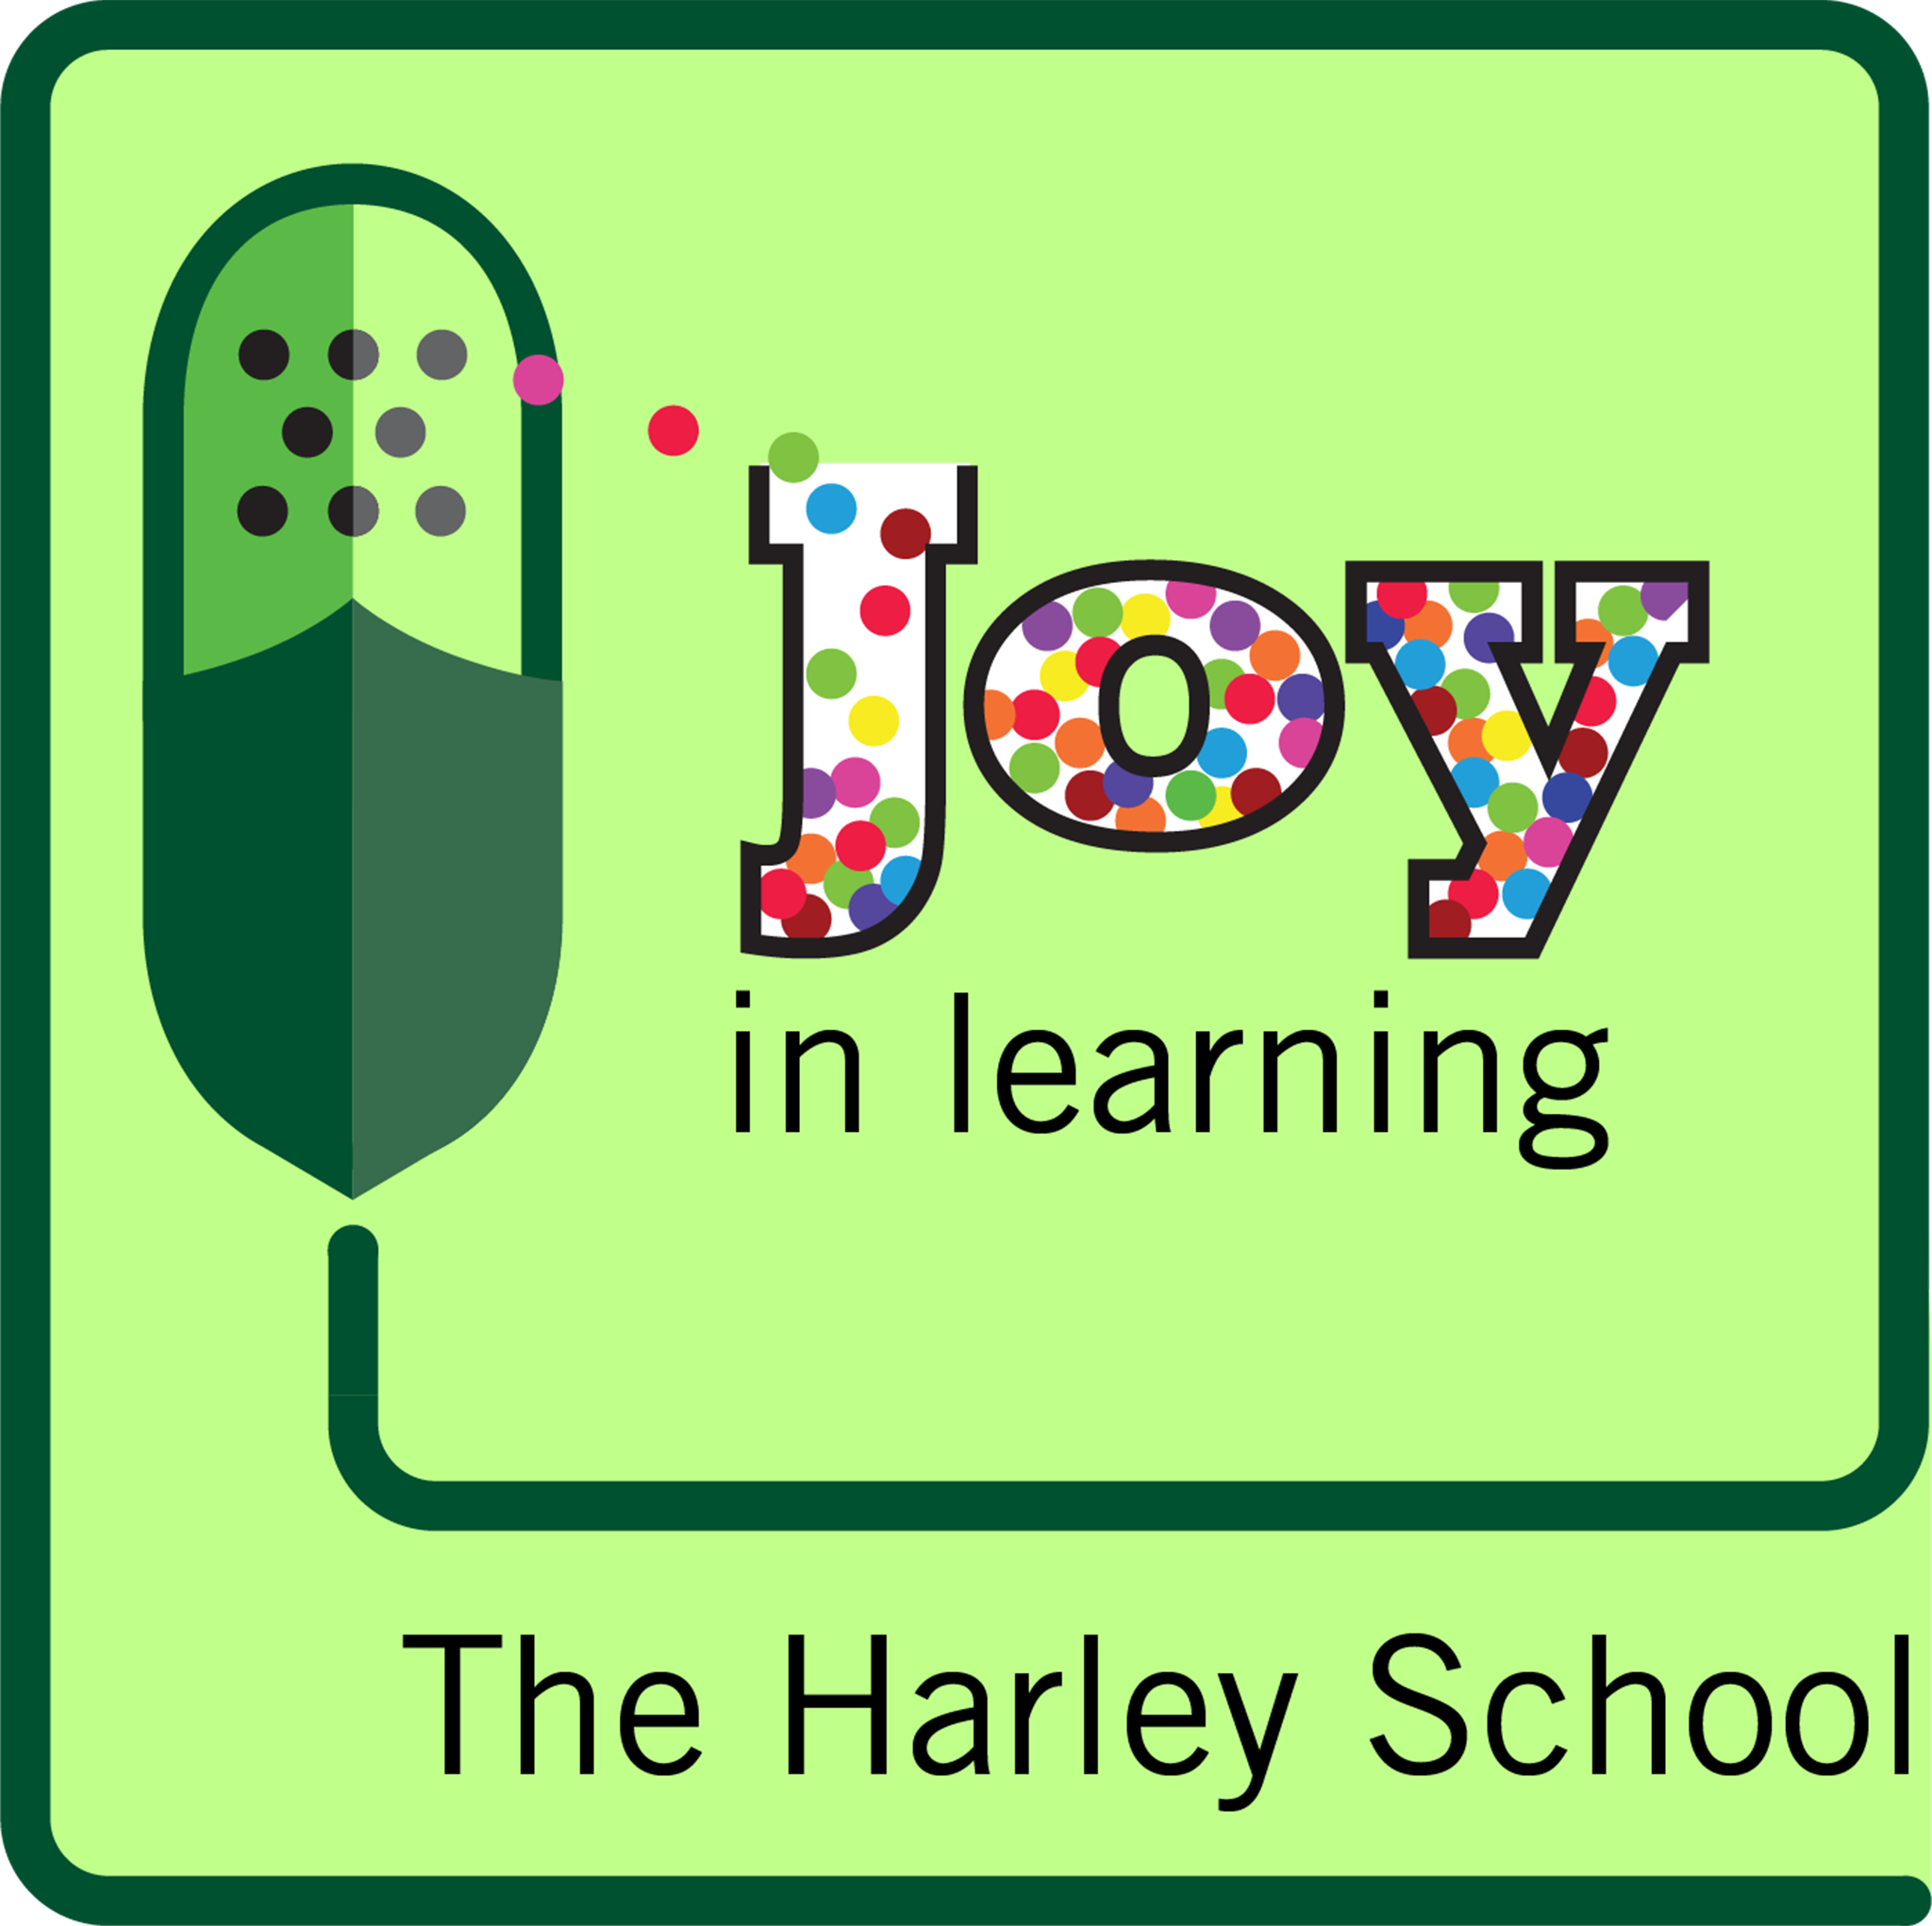 Joy In Learning: Episode 11, Terry Smith, Play in Learning (Part 2)